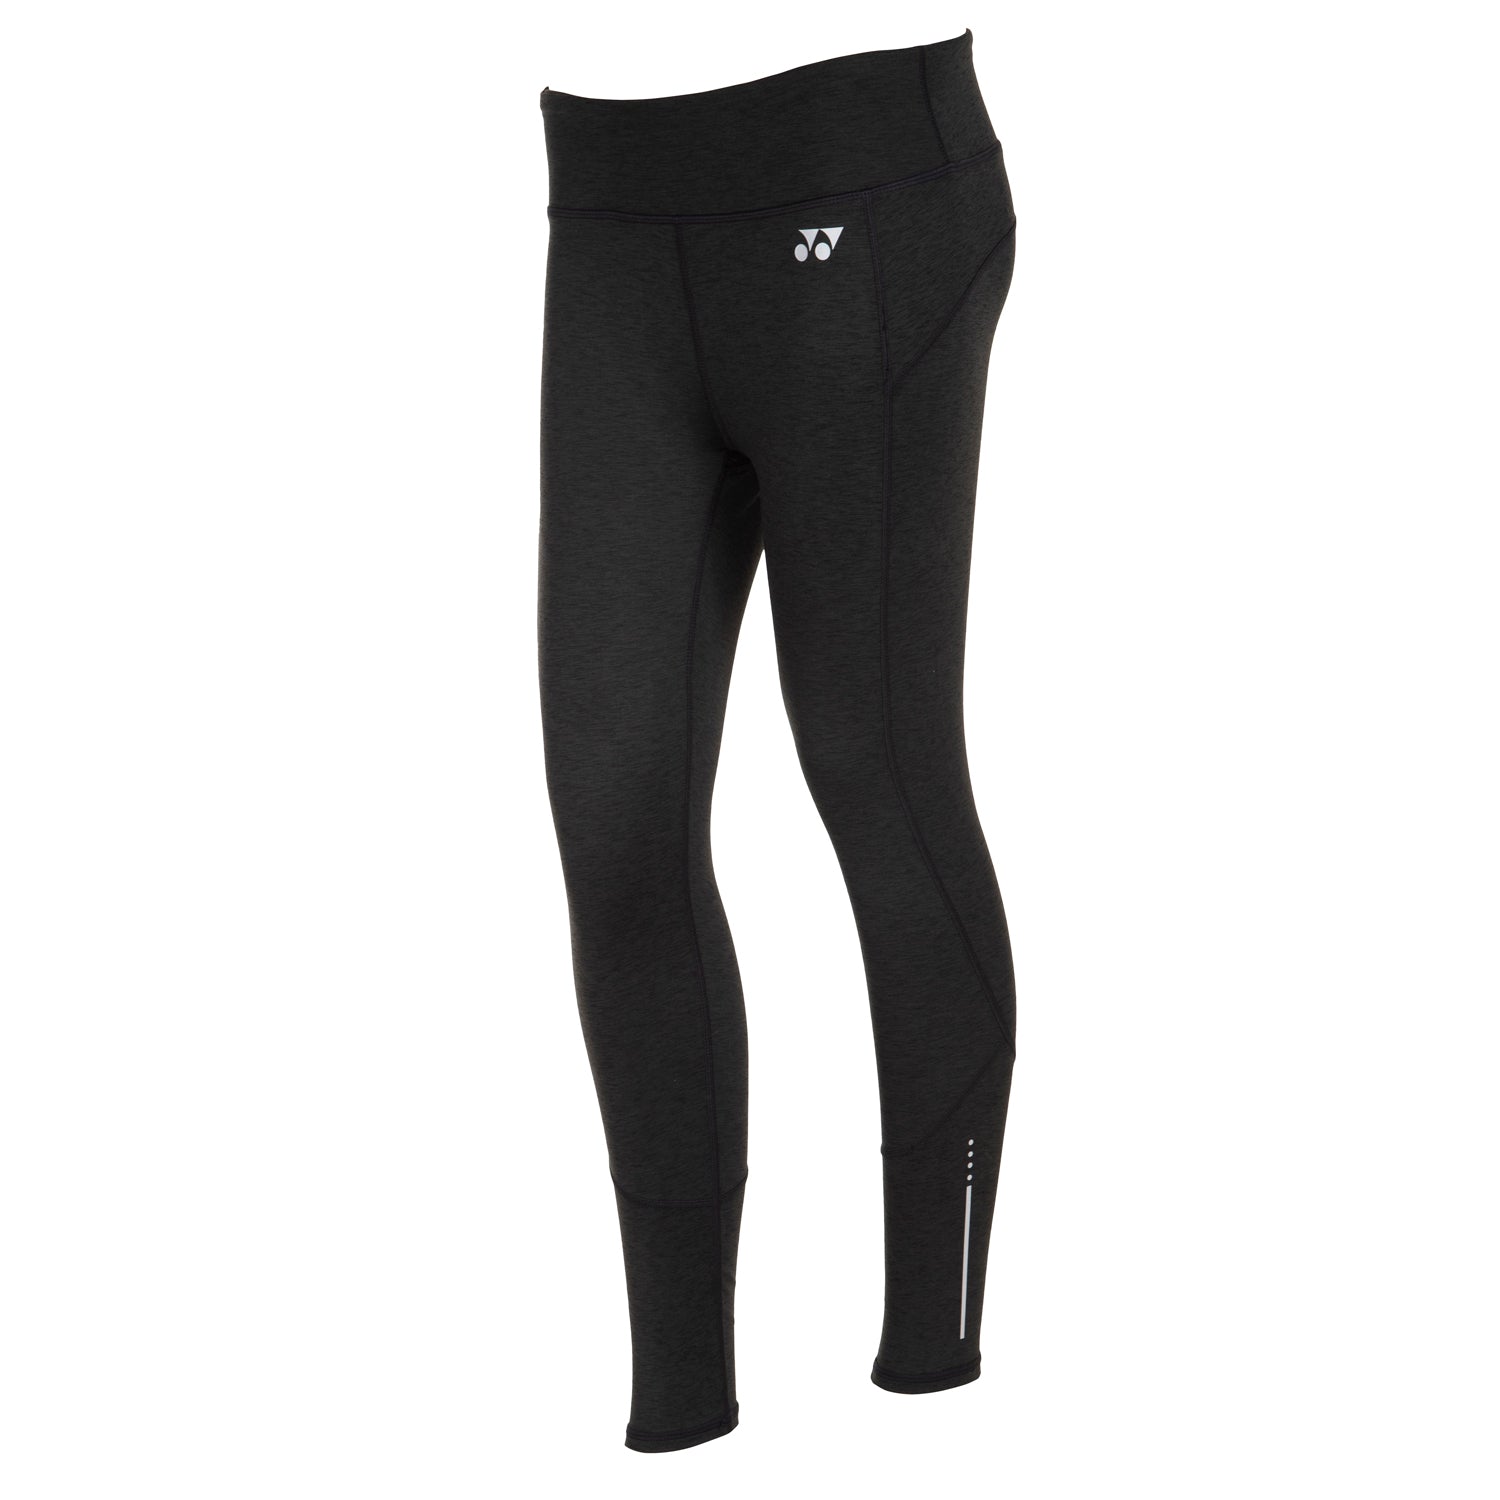 Buy Leggings with Pockets Online from BlissClub